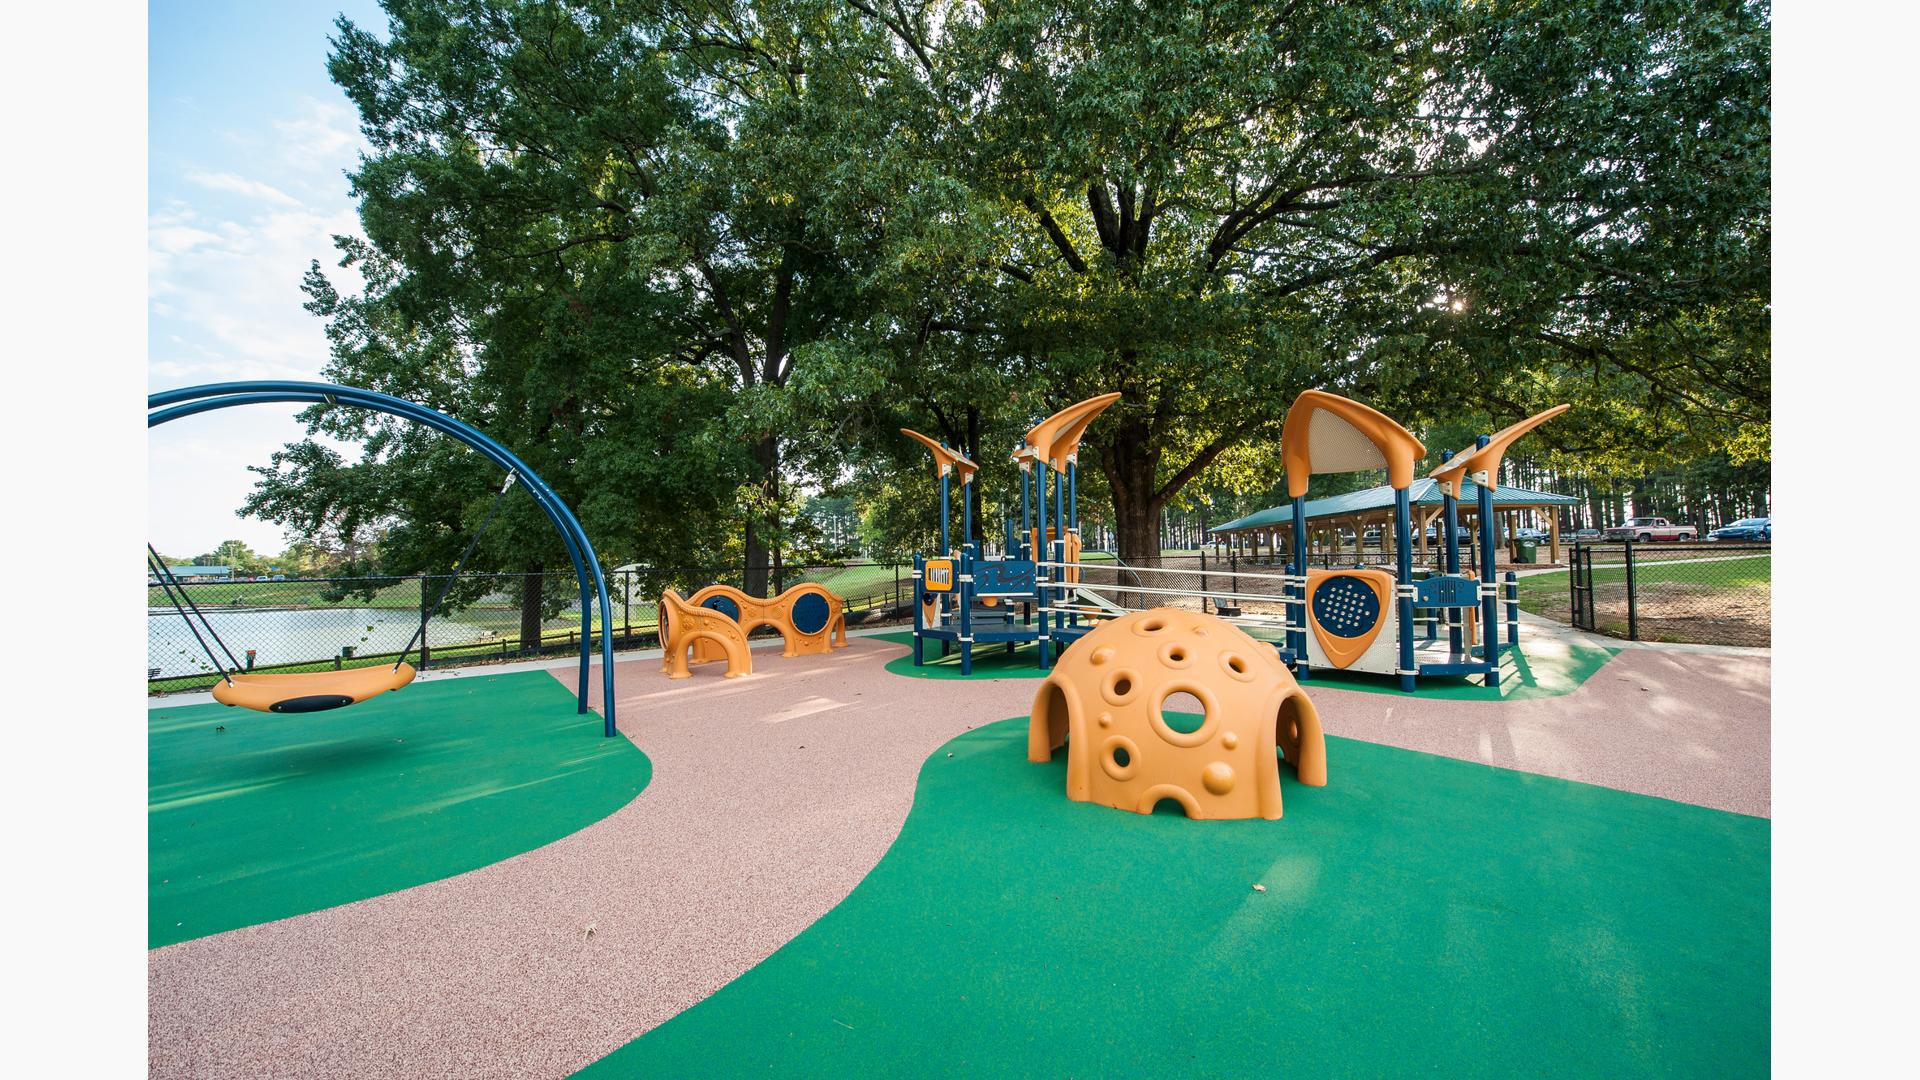 Inclusive PlayBooster playground with custom surfacing and freestanding equipment like the Cozy hut sensory component and Oodle swing with a body of water behind the park and a large tree covering the playground in shade.